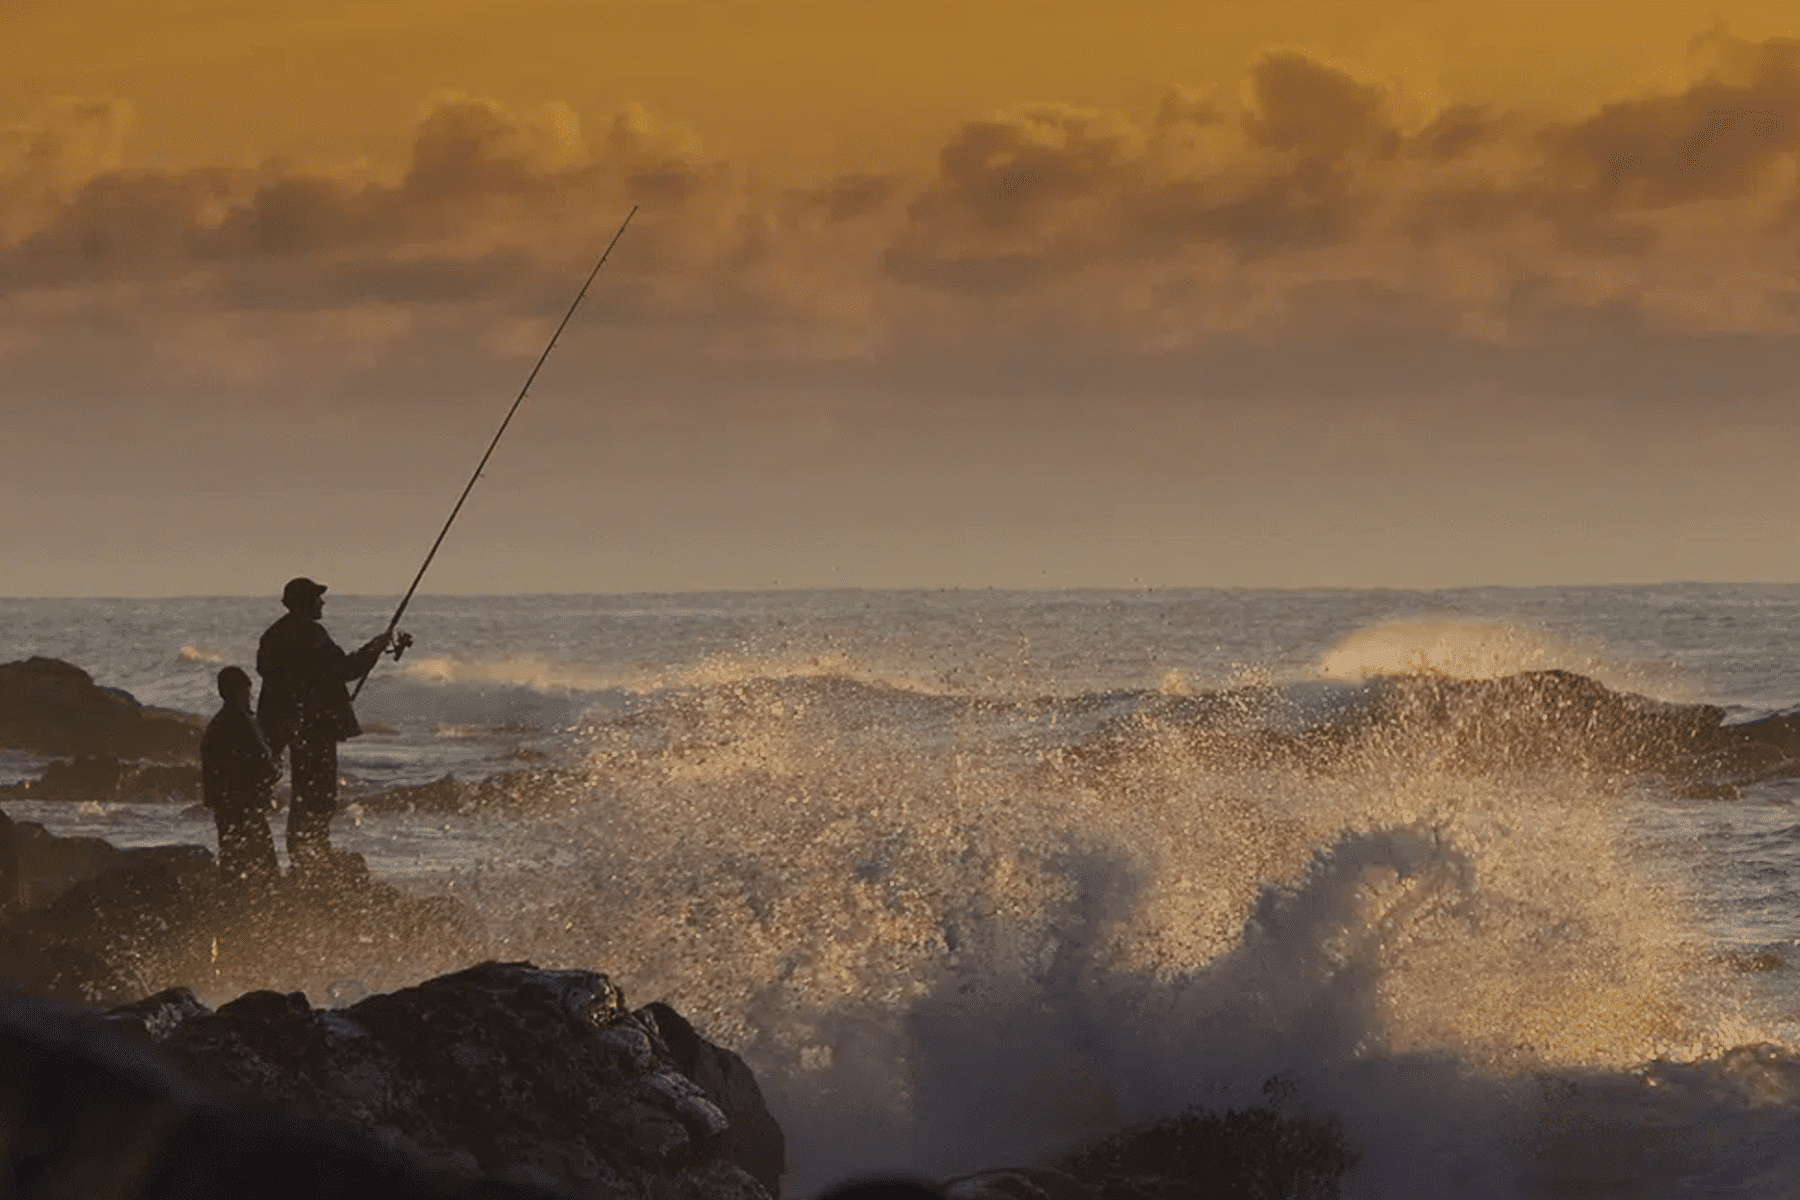 Fly Fishing the Surf on the Central Coast - Harvesting Nature